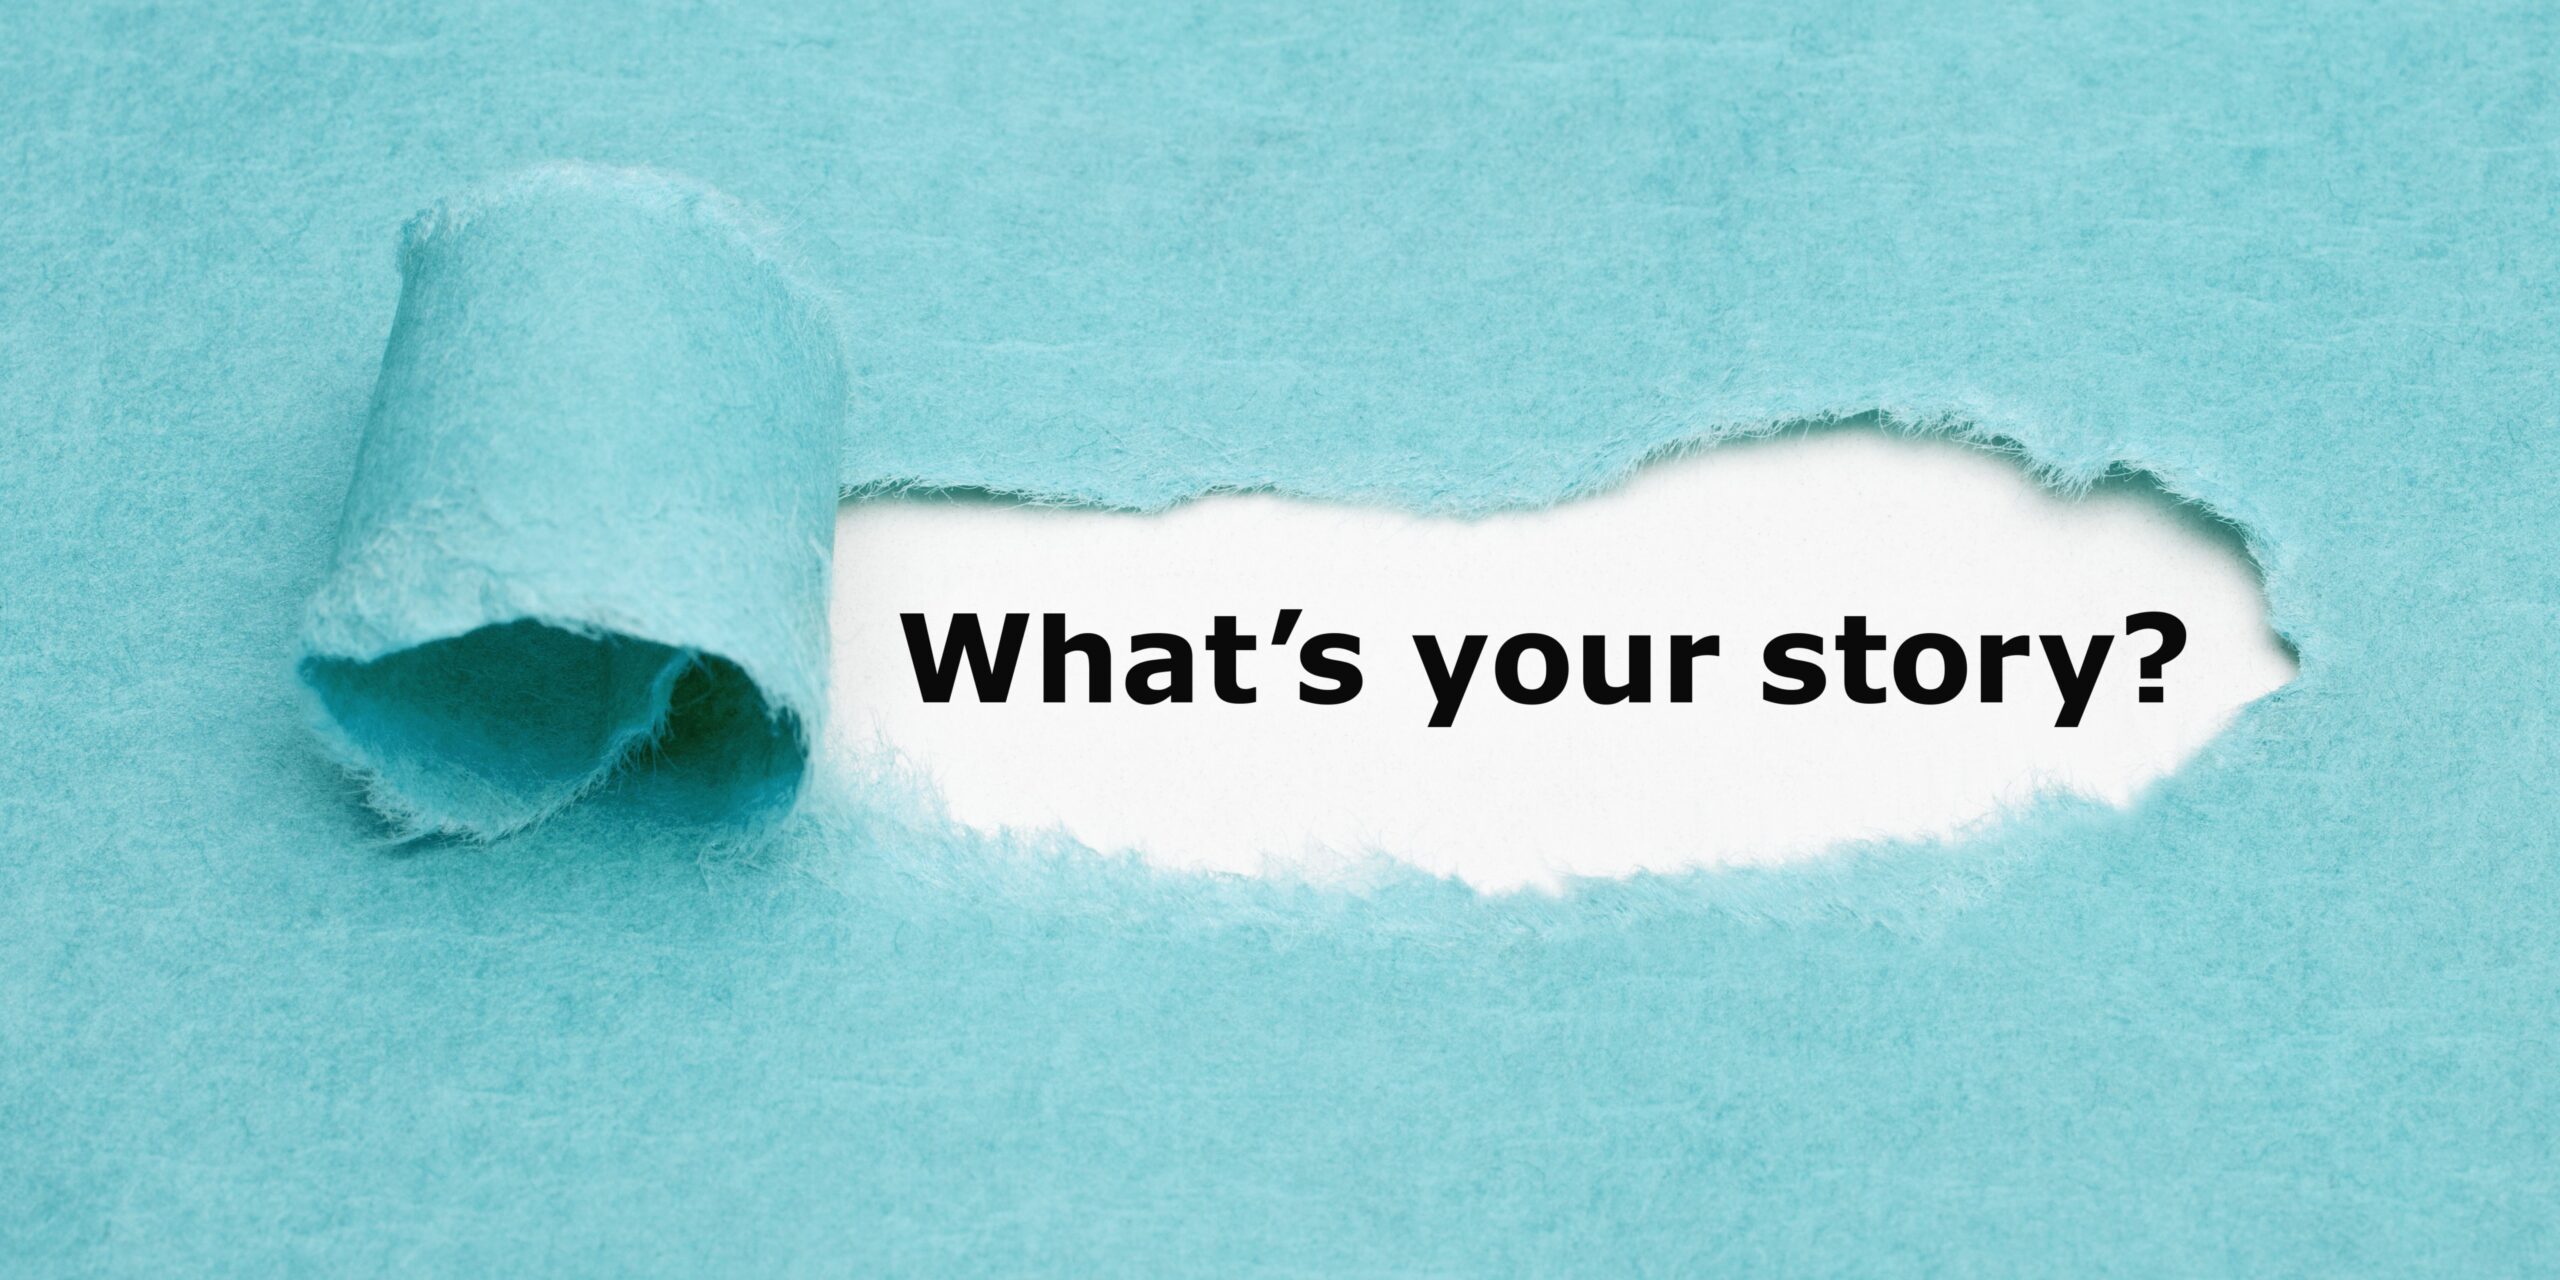 What’s your story? Filip Moens